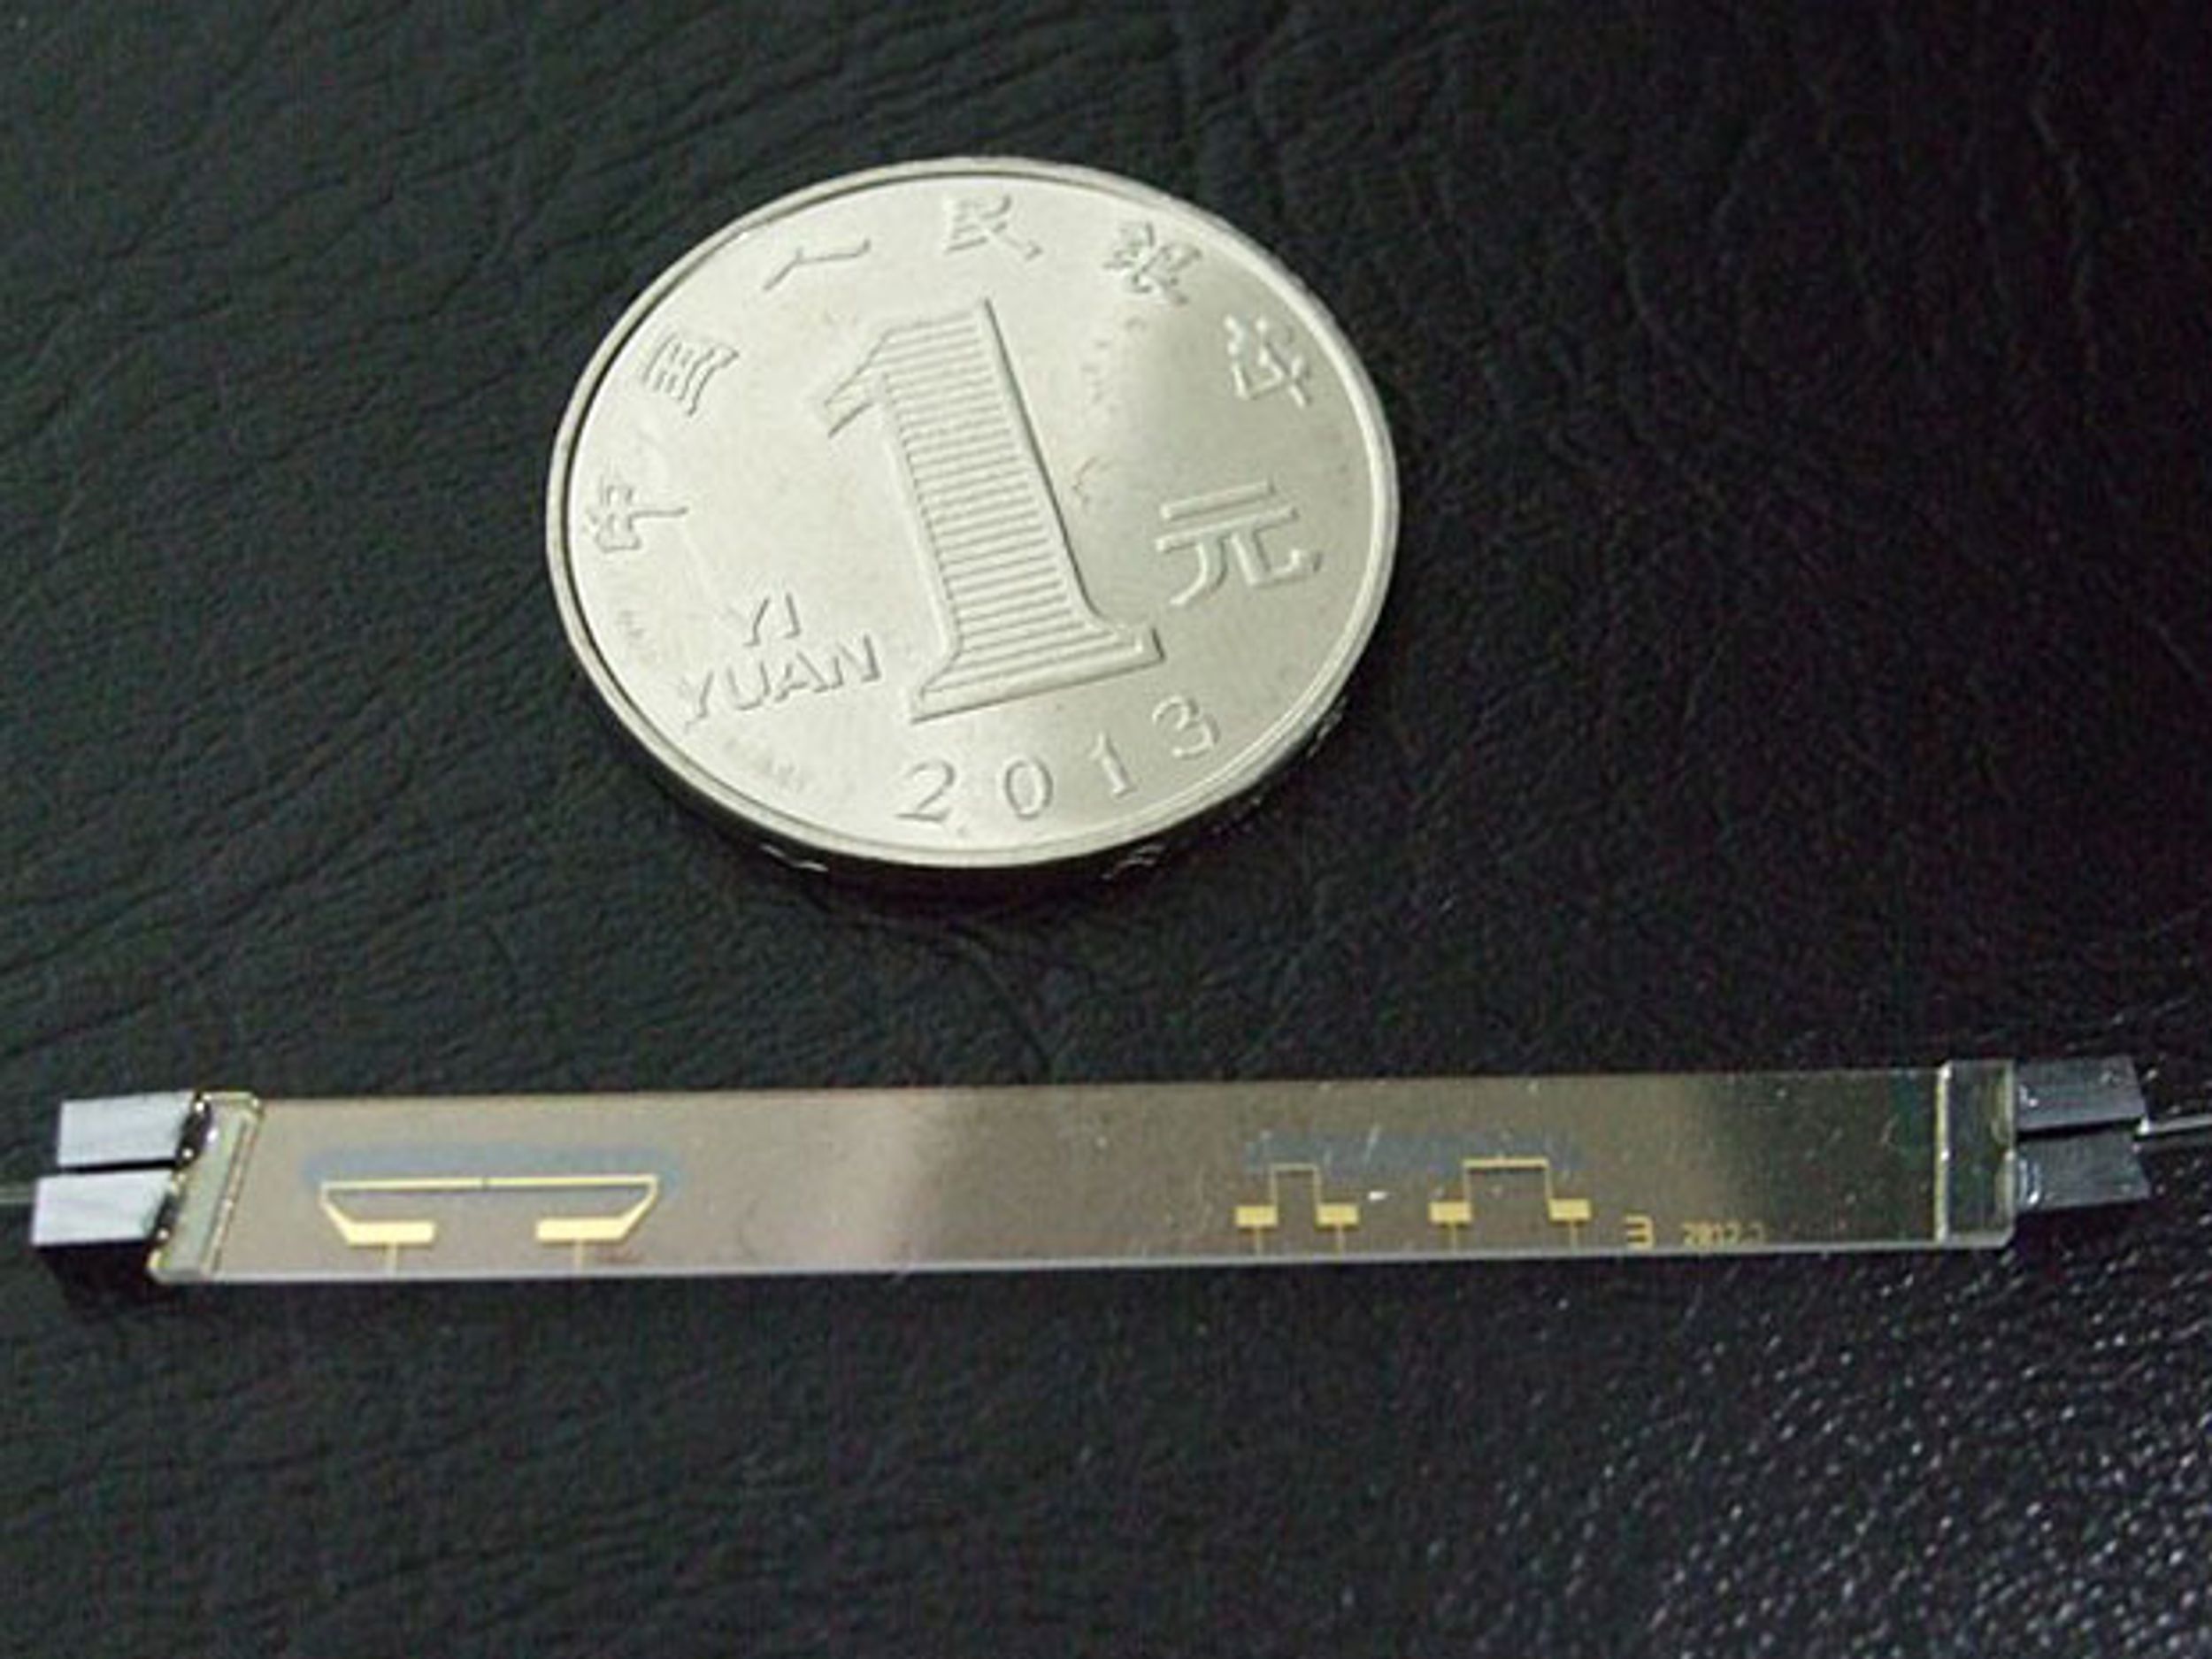 Small coin next to photonic chip to show scale